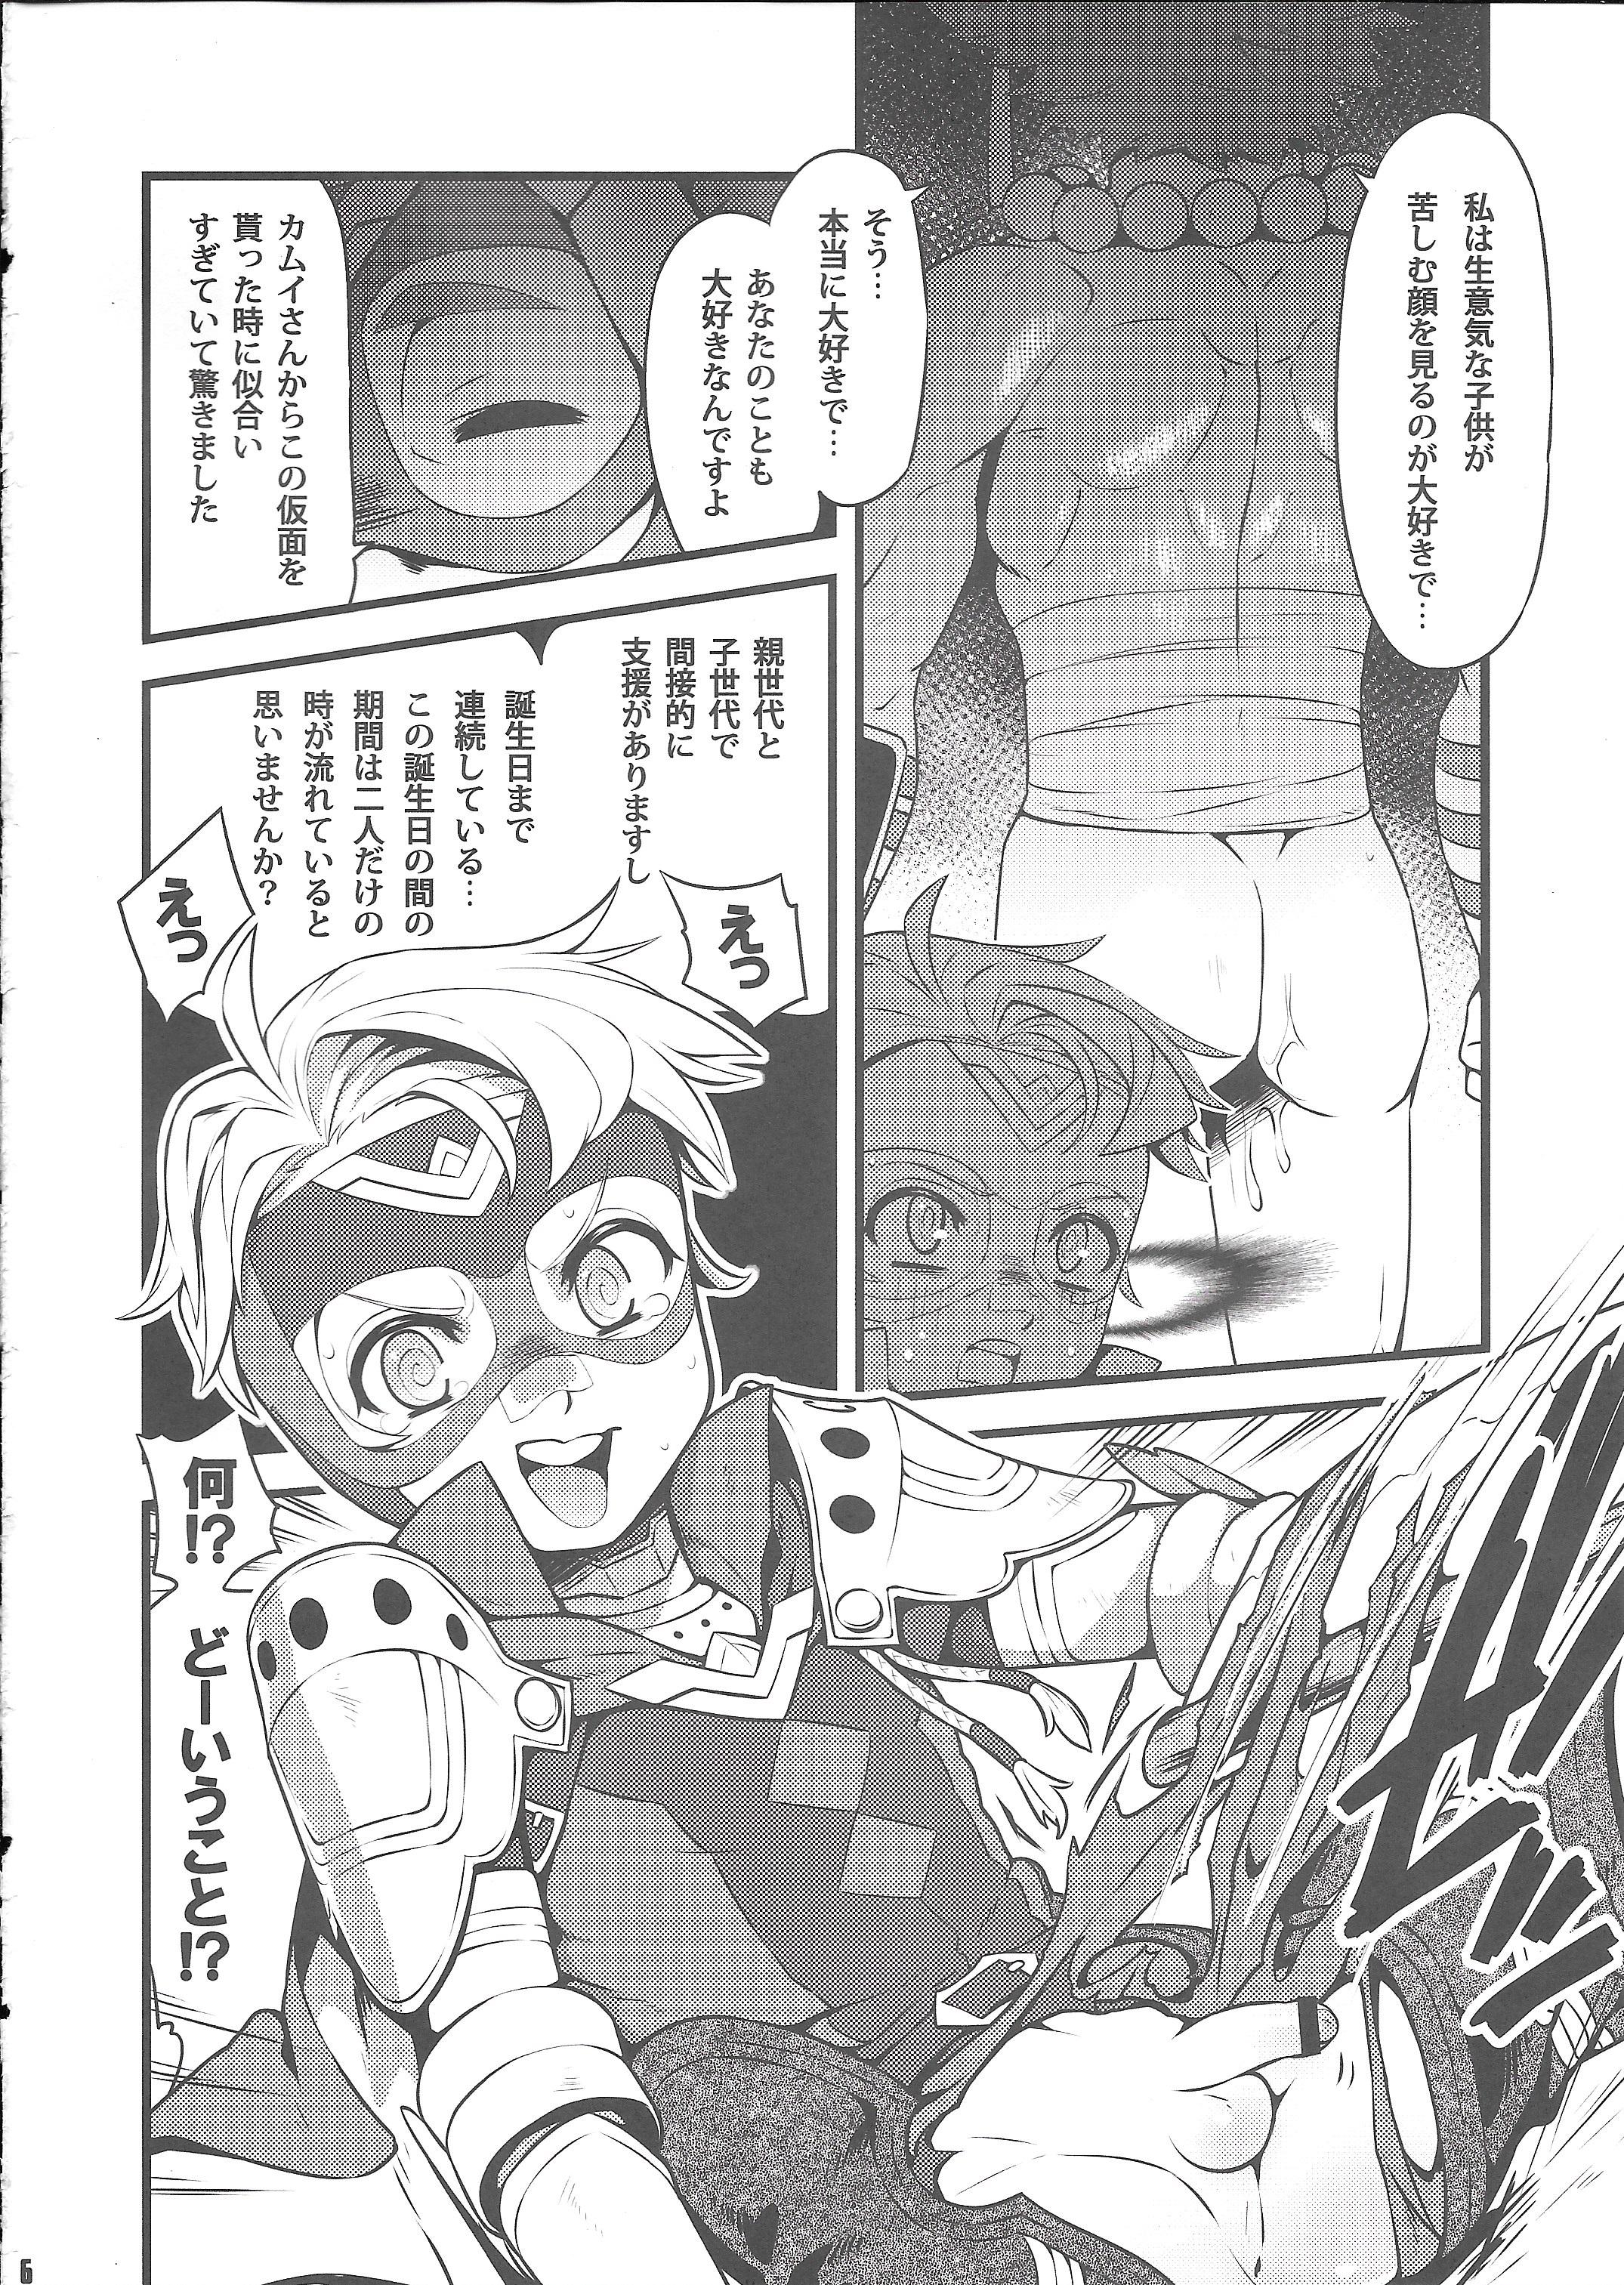 Teenxxx September 5 to 8 - Fire emblem if Toy - Page 5